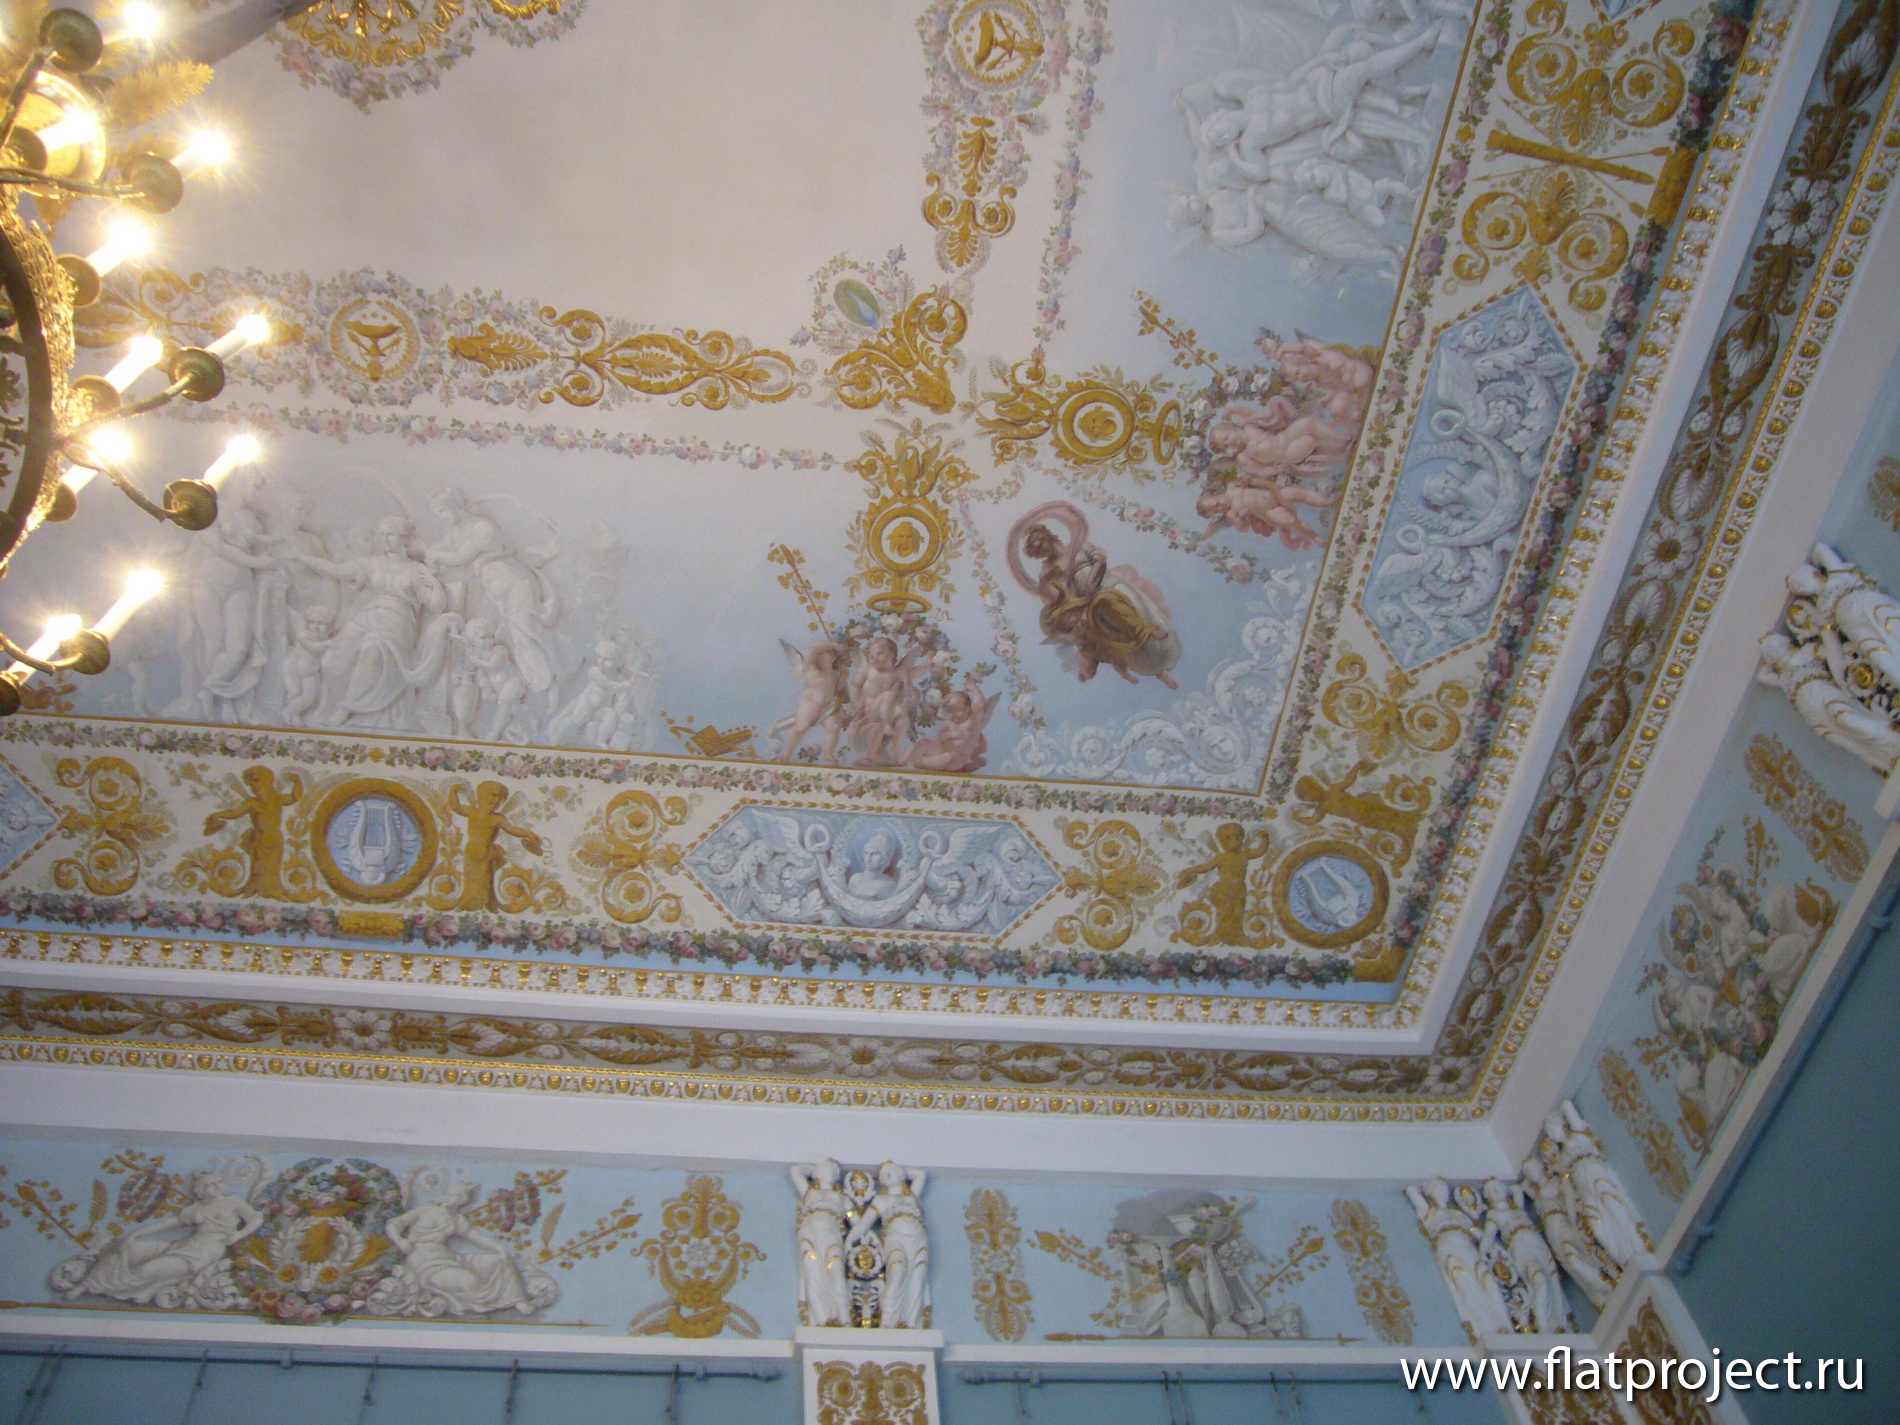 The State Russian museum interiors – photo 75